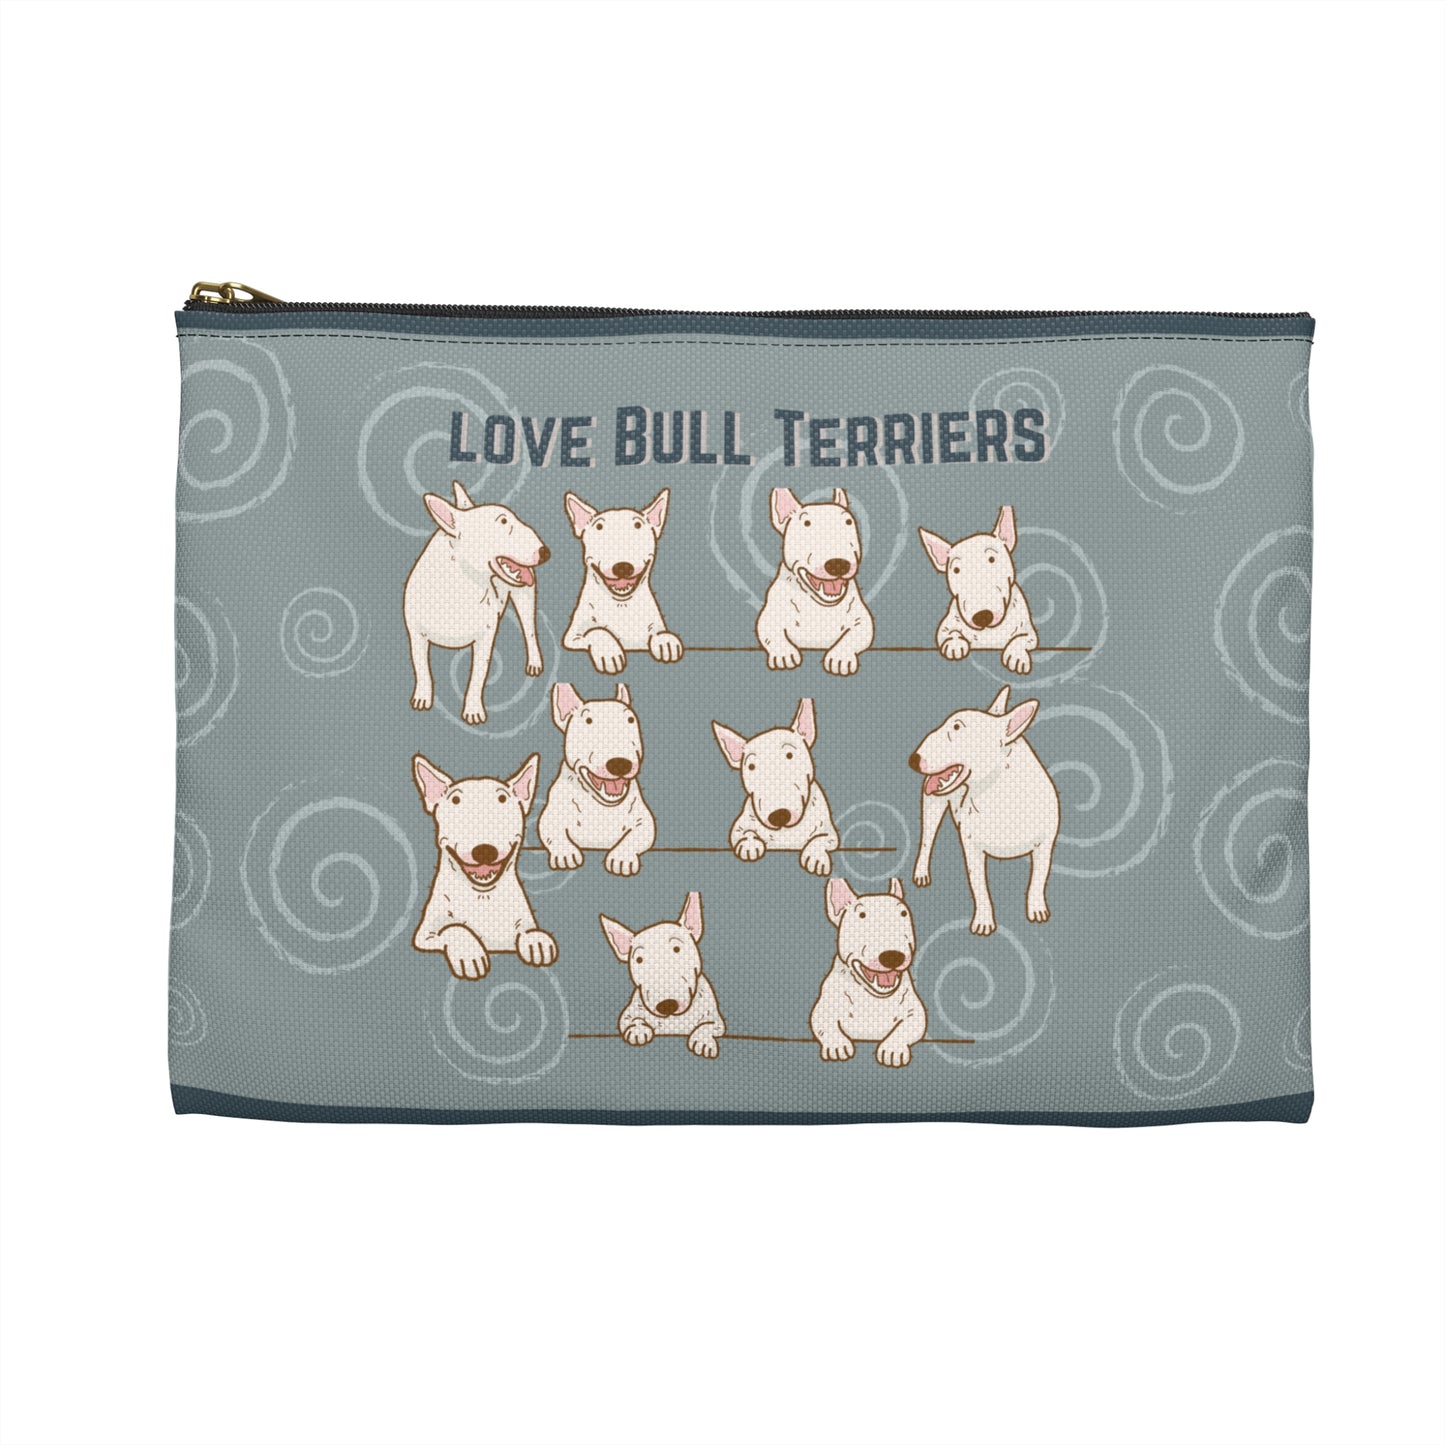 Bull Terrier Accessory Travel Pouch, Bully All-Purpose Bag